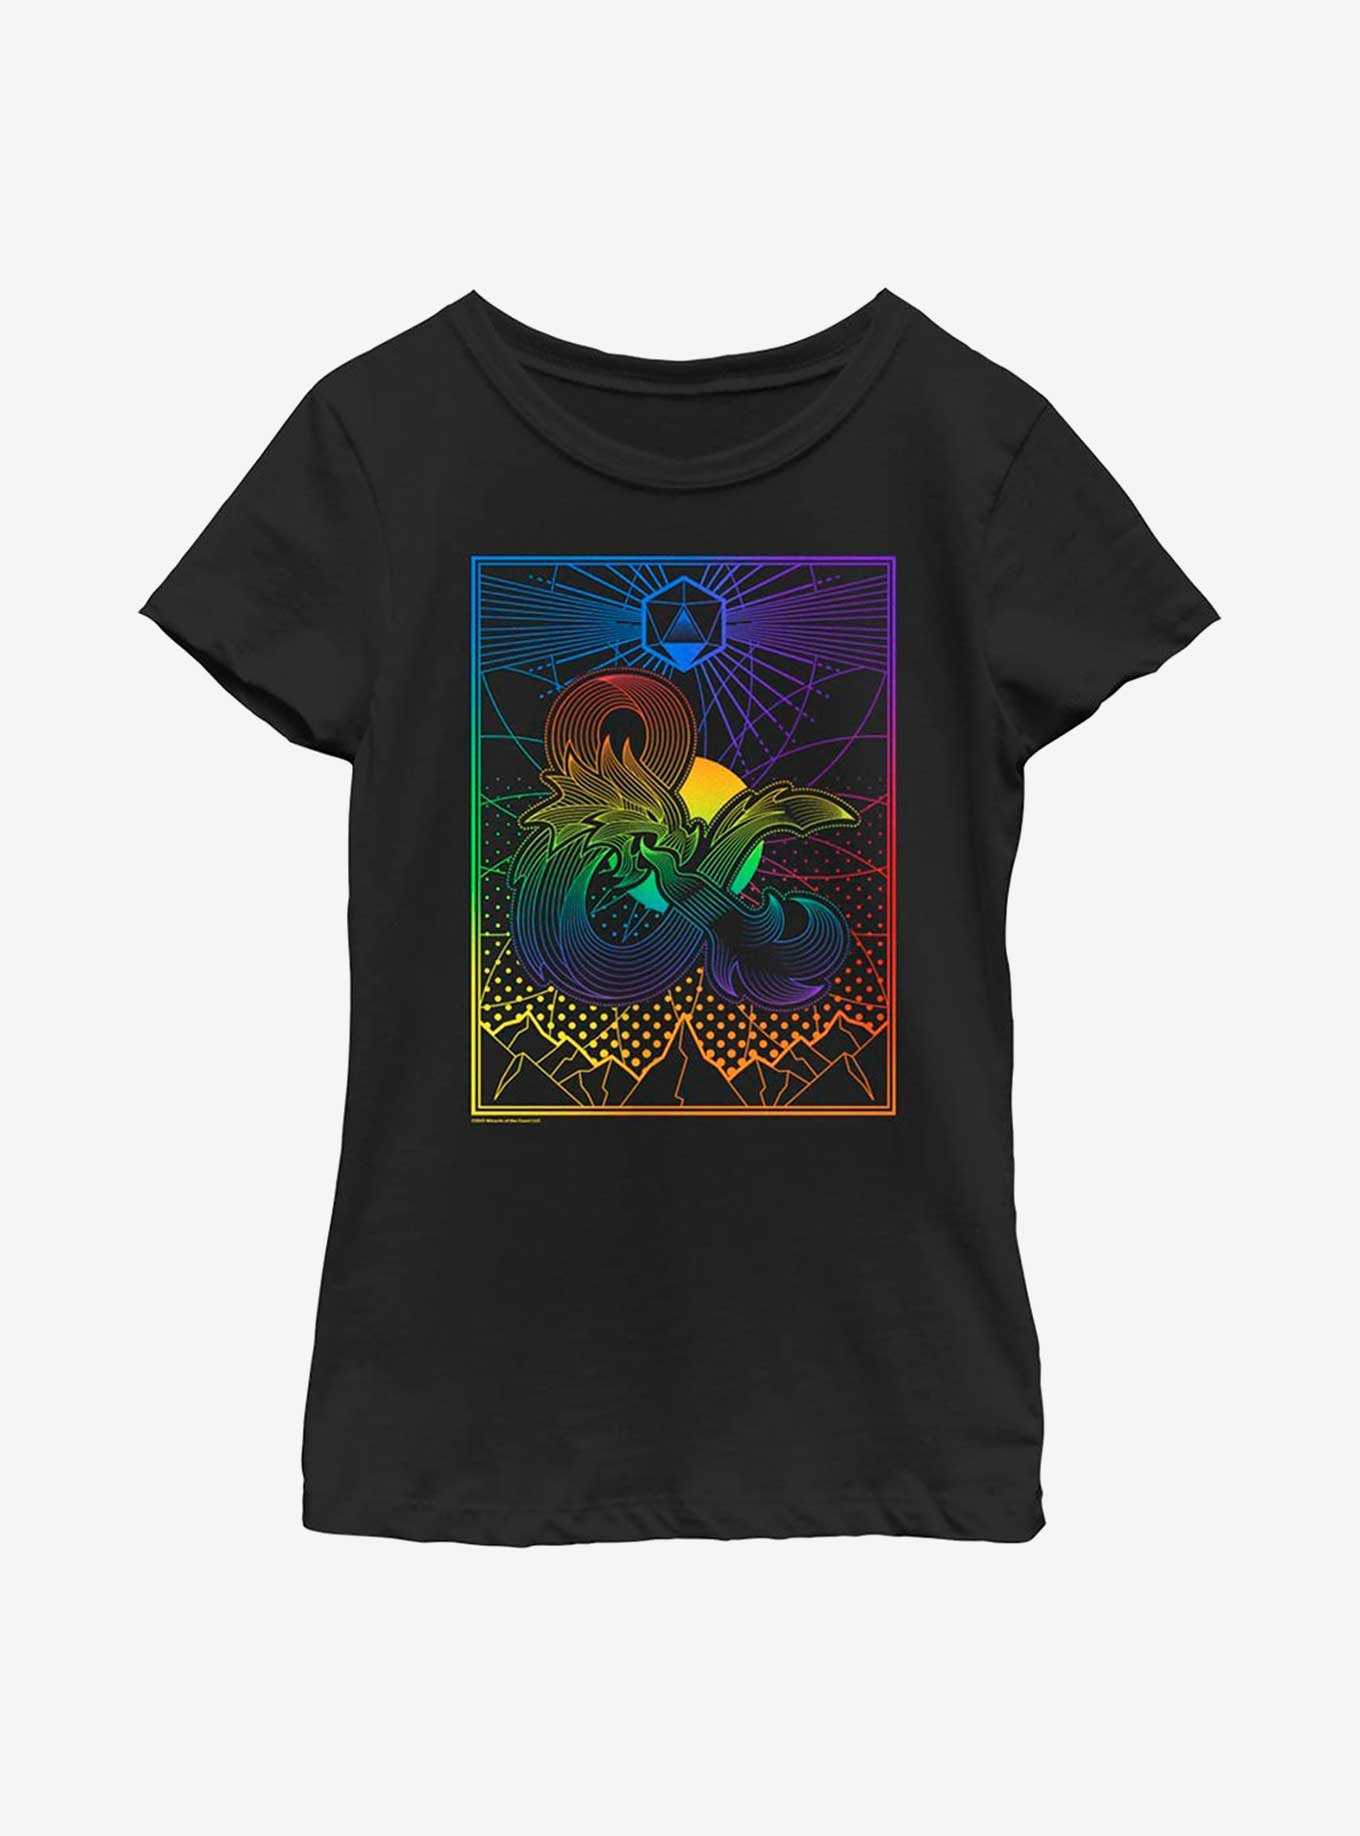 Dungeons And Dragons Gradient Landscape Youth T-Shirt, , hi-res